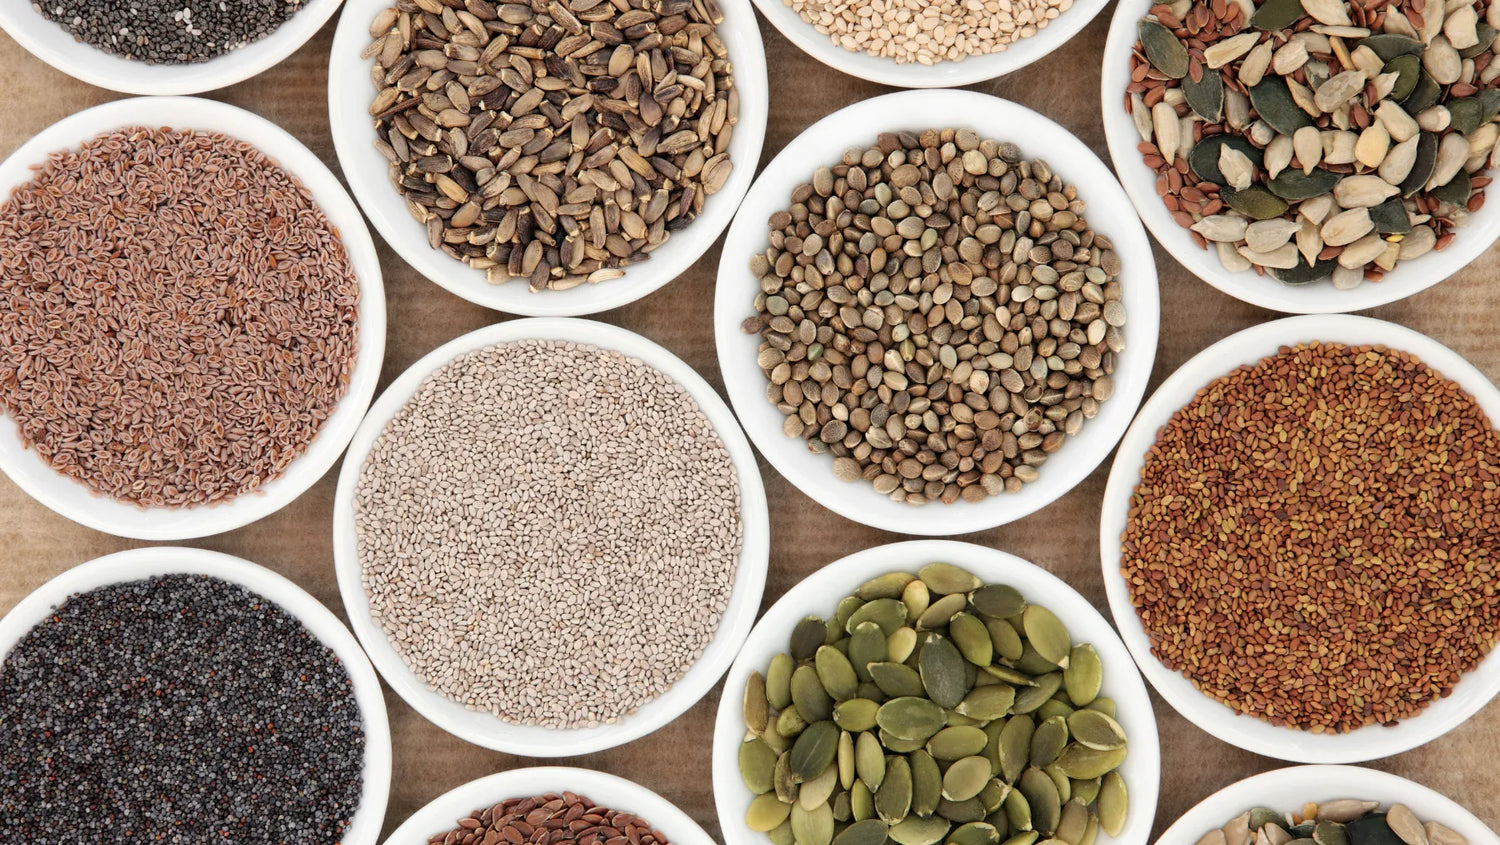 What Are Superfoods And Why Should You Add Them To Your Daily Diet?